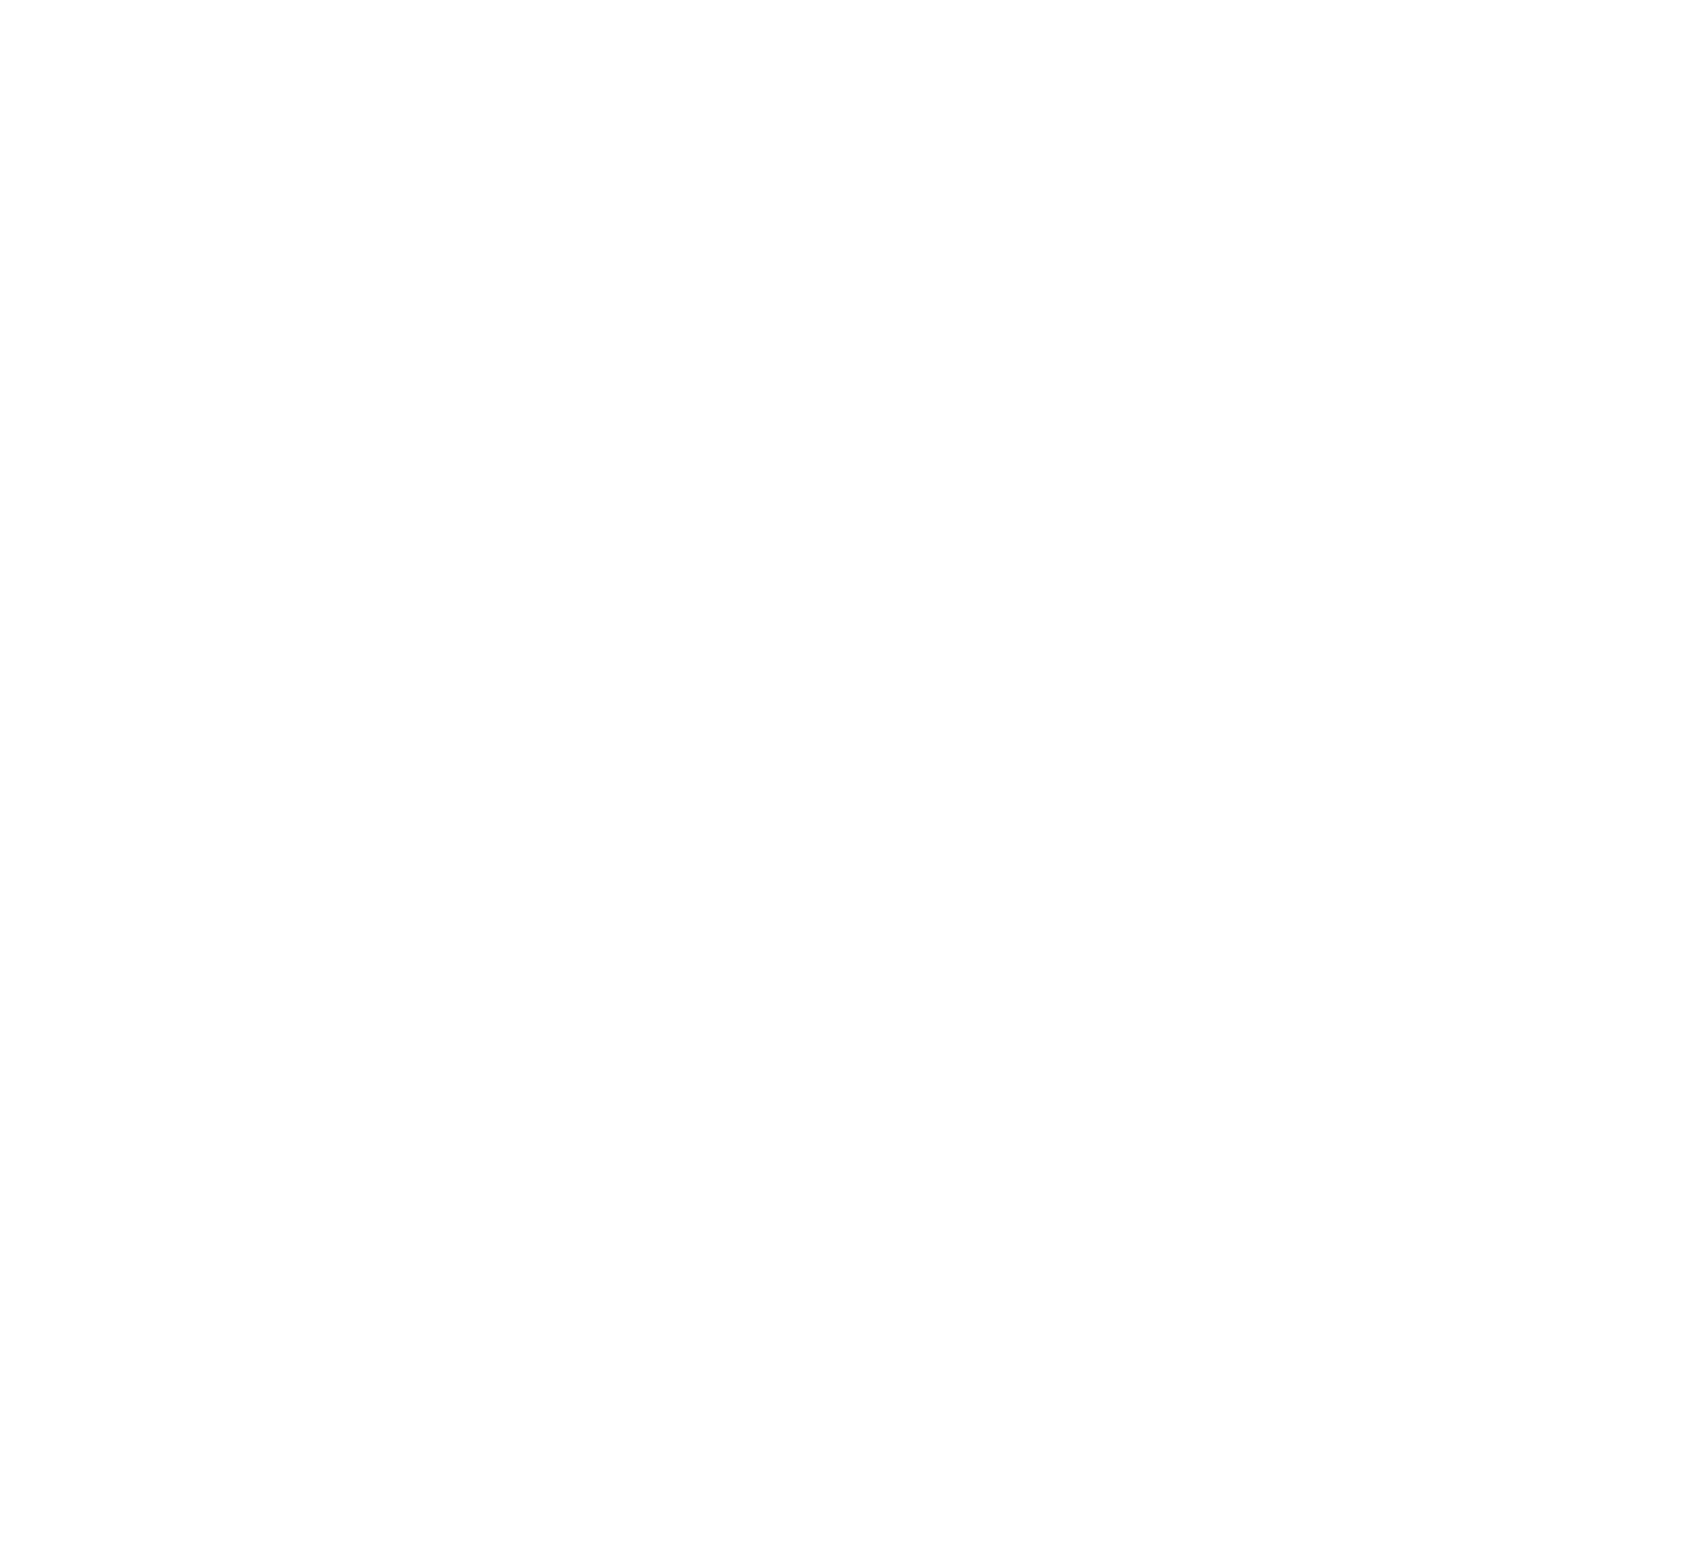 South Yorkshire Business logo